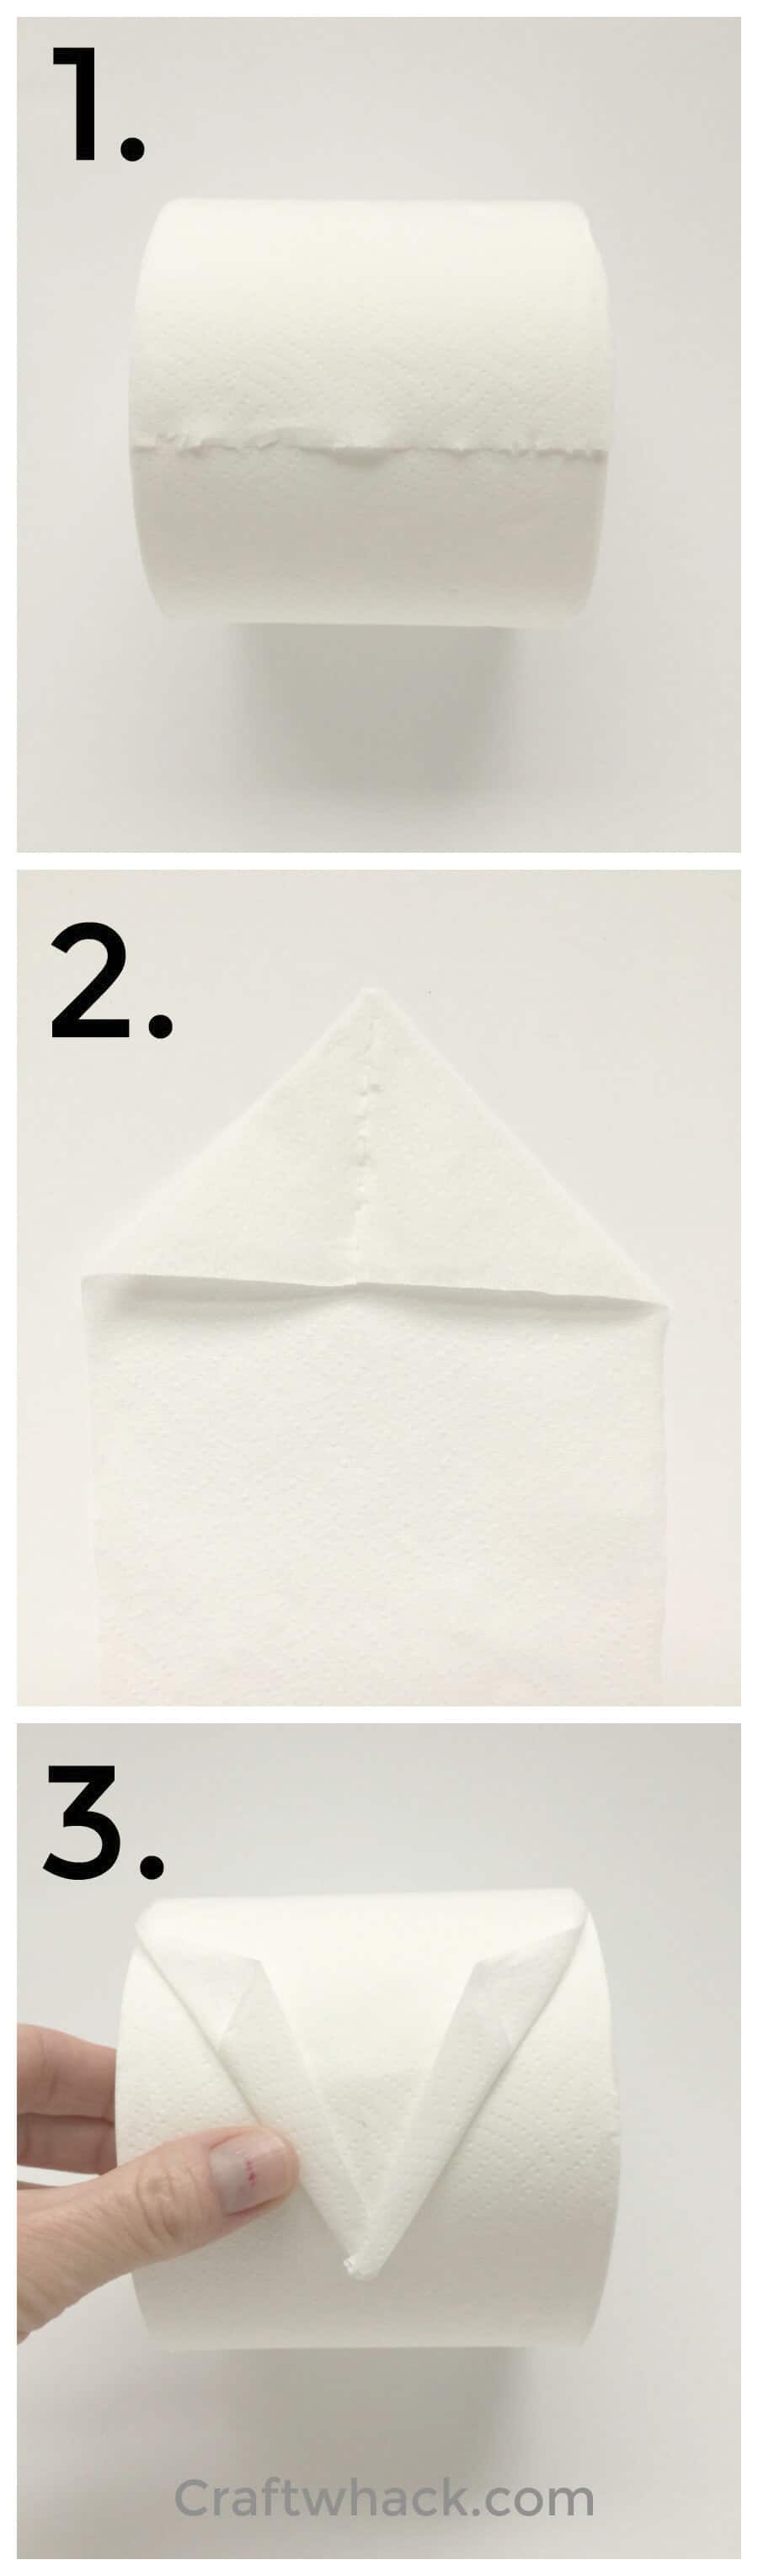 how to make a sailboat on toilet paper